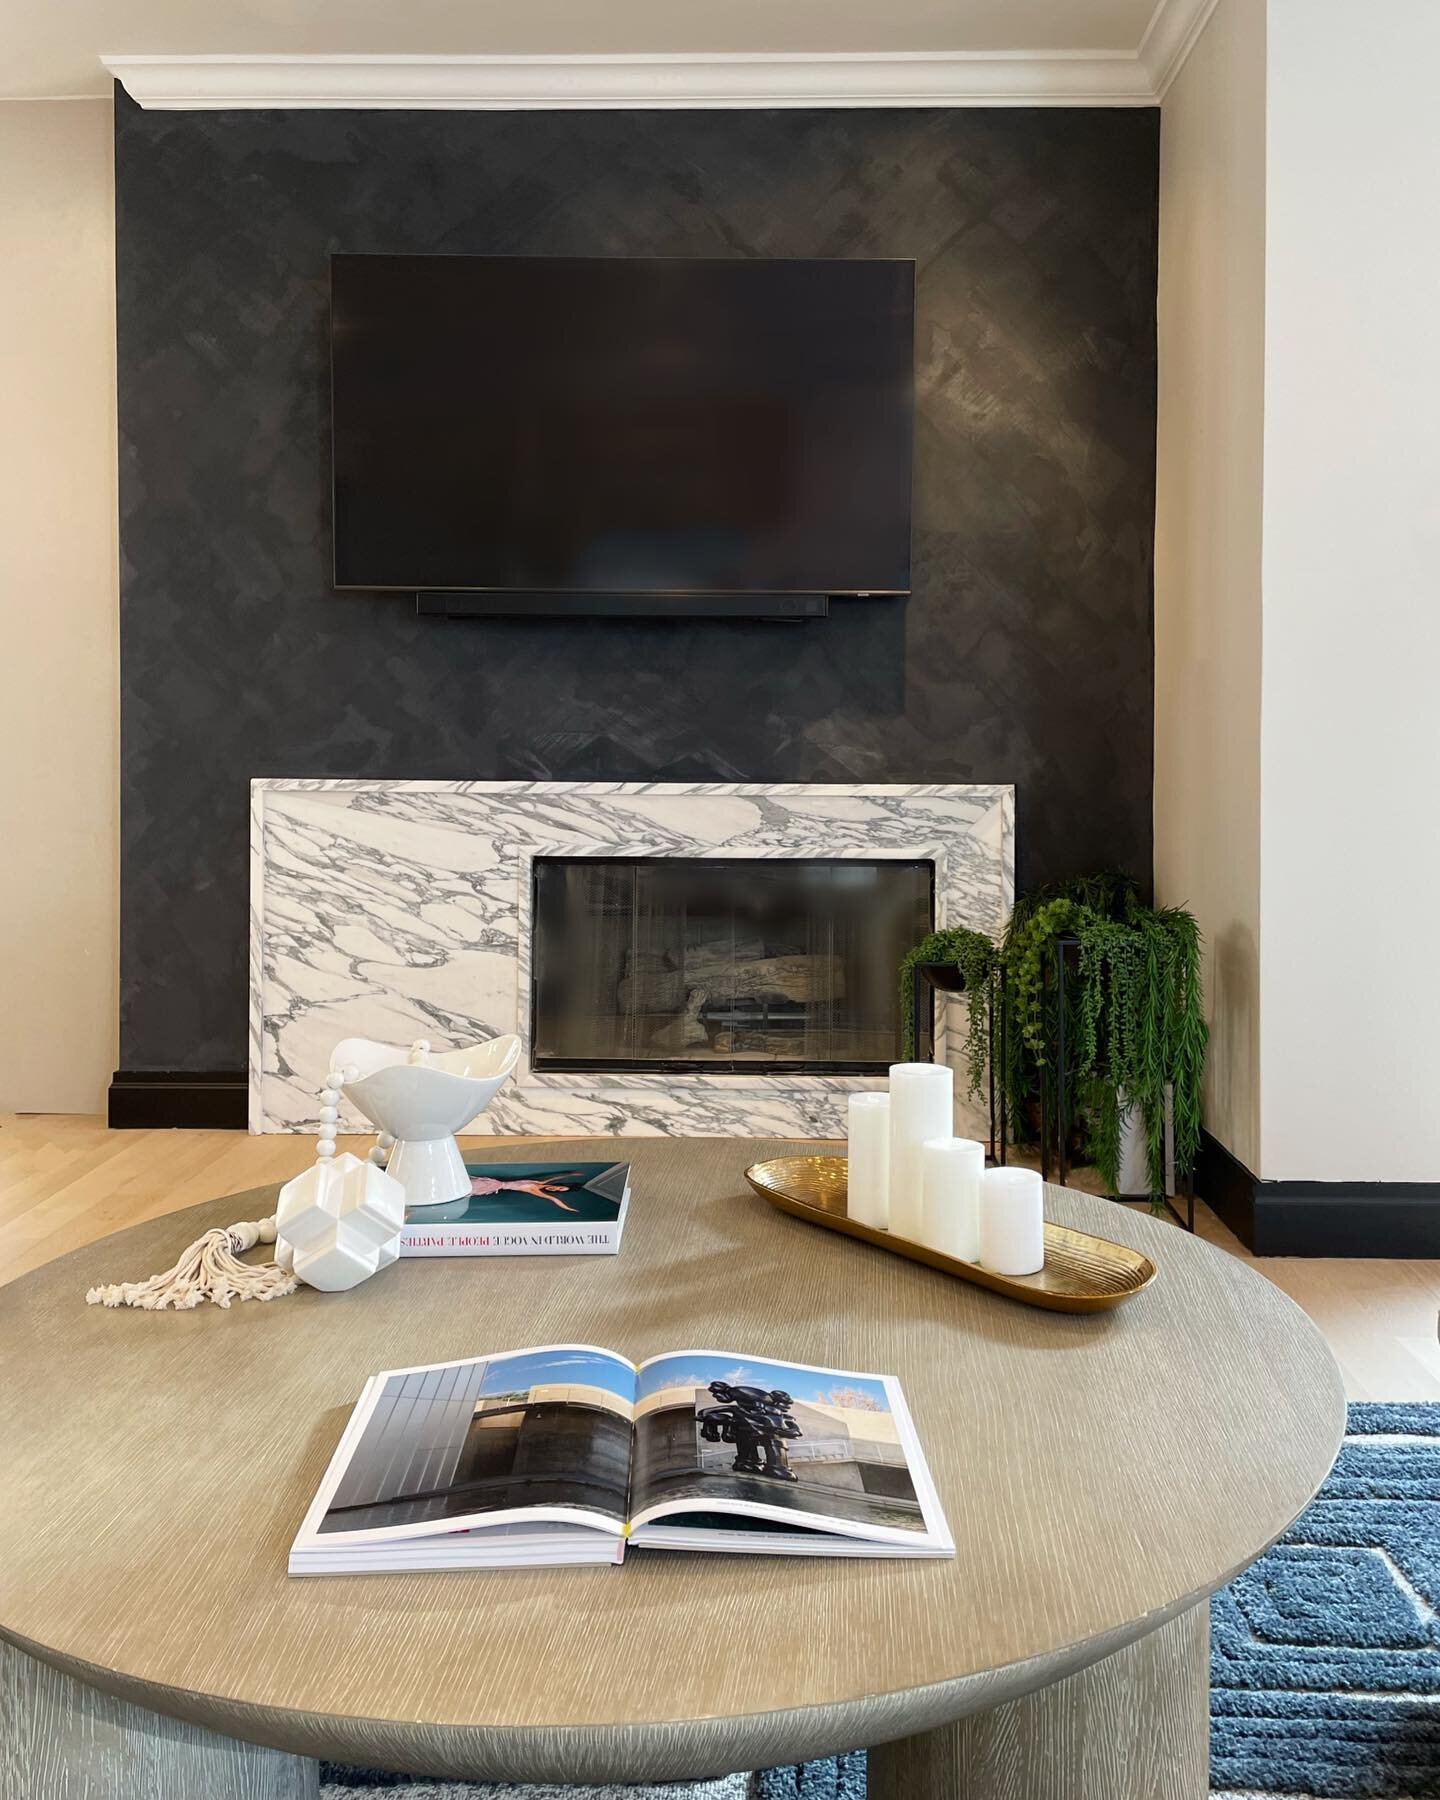 We&rsquo;re half way through the week! Swipe to see before &amp; after and what keeps us motivated everyday. Design by @houseof_meraki .
.
.
.
 #HOMdesign #HOMdesigns #HOMinspired #HouseOfMeraki build by @essentialhomeremodelny #fireplace #fireplaced